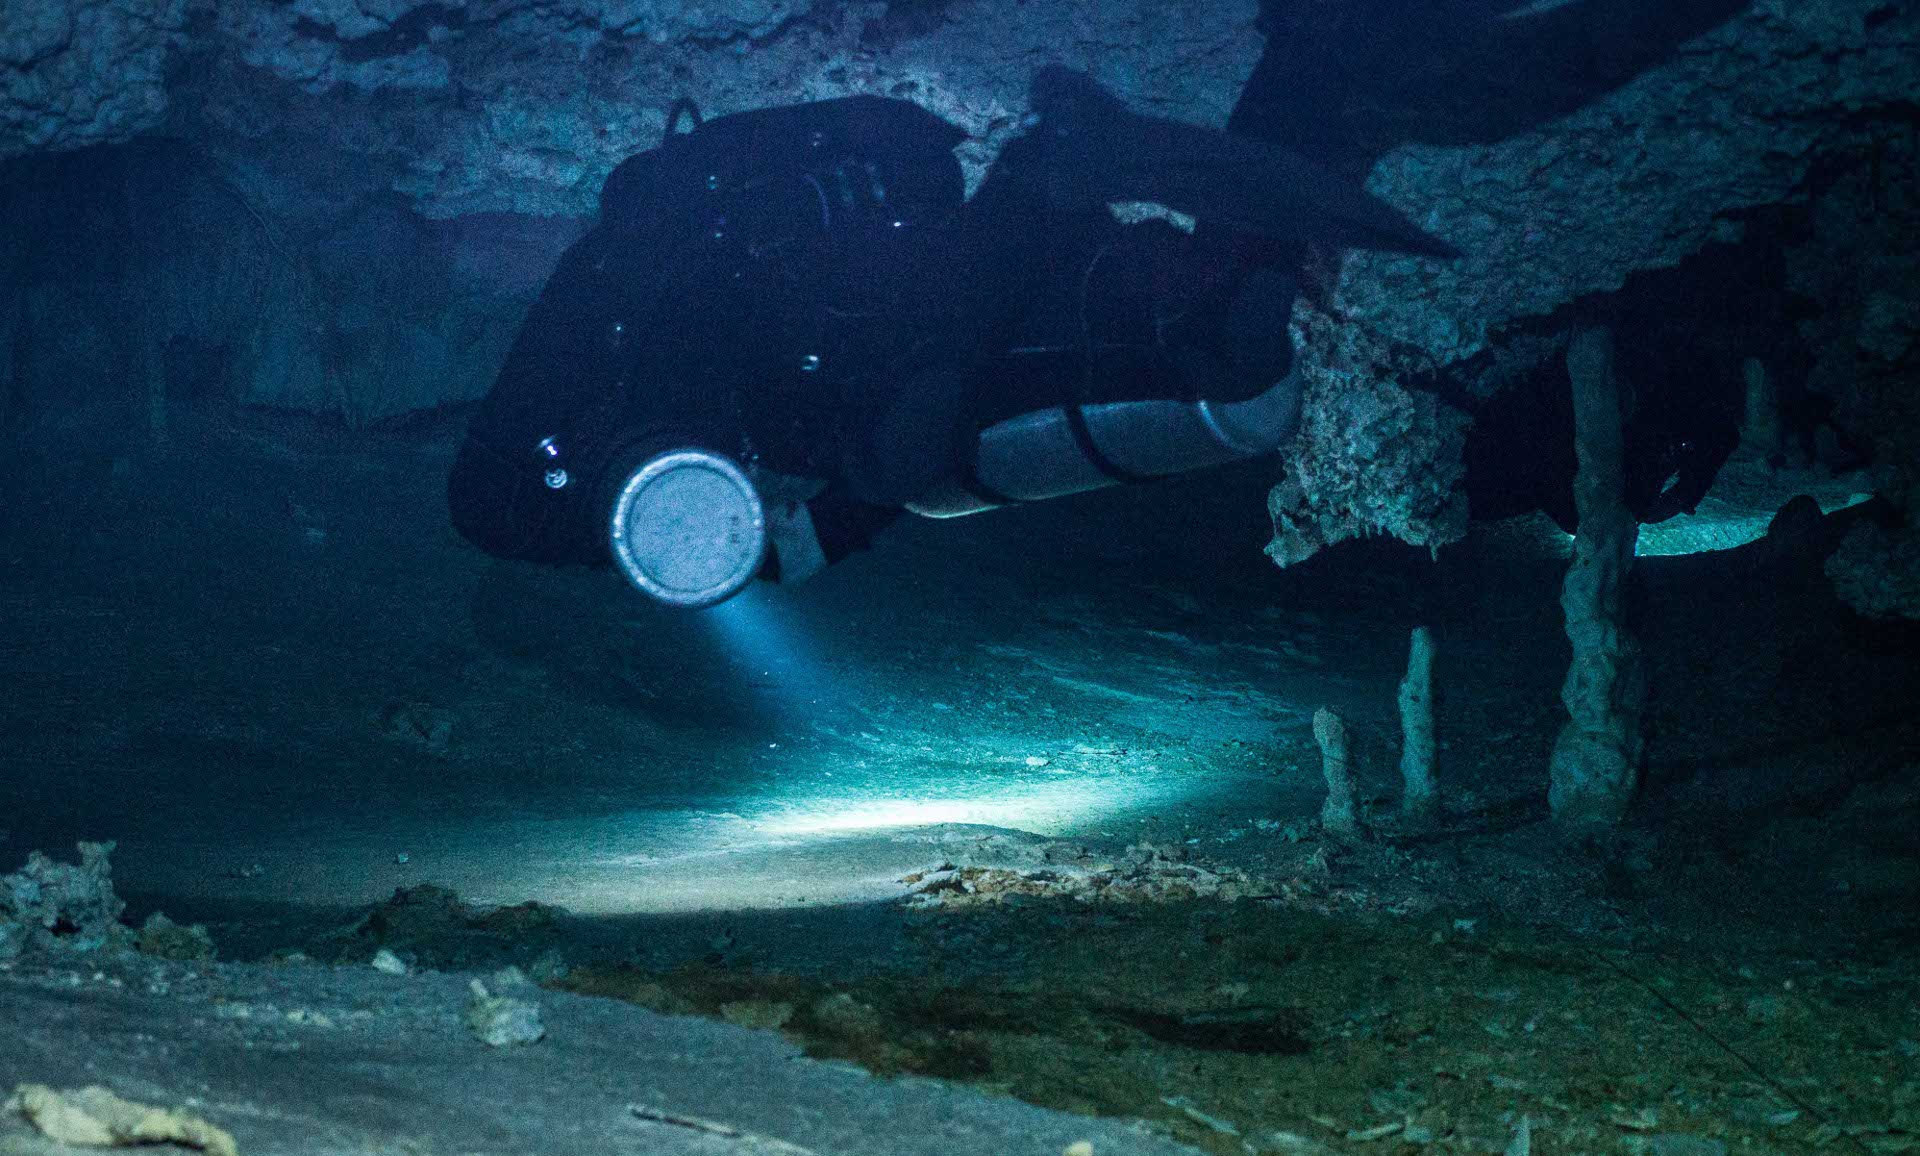 Diving inside the Caubian cave